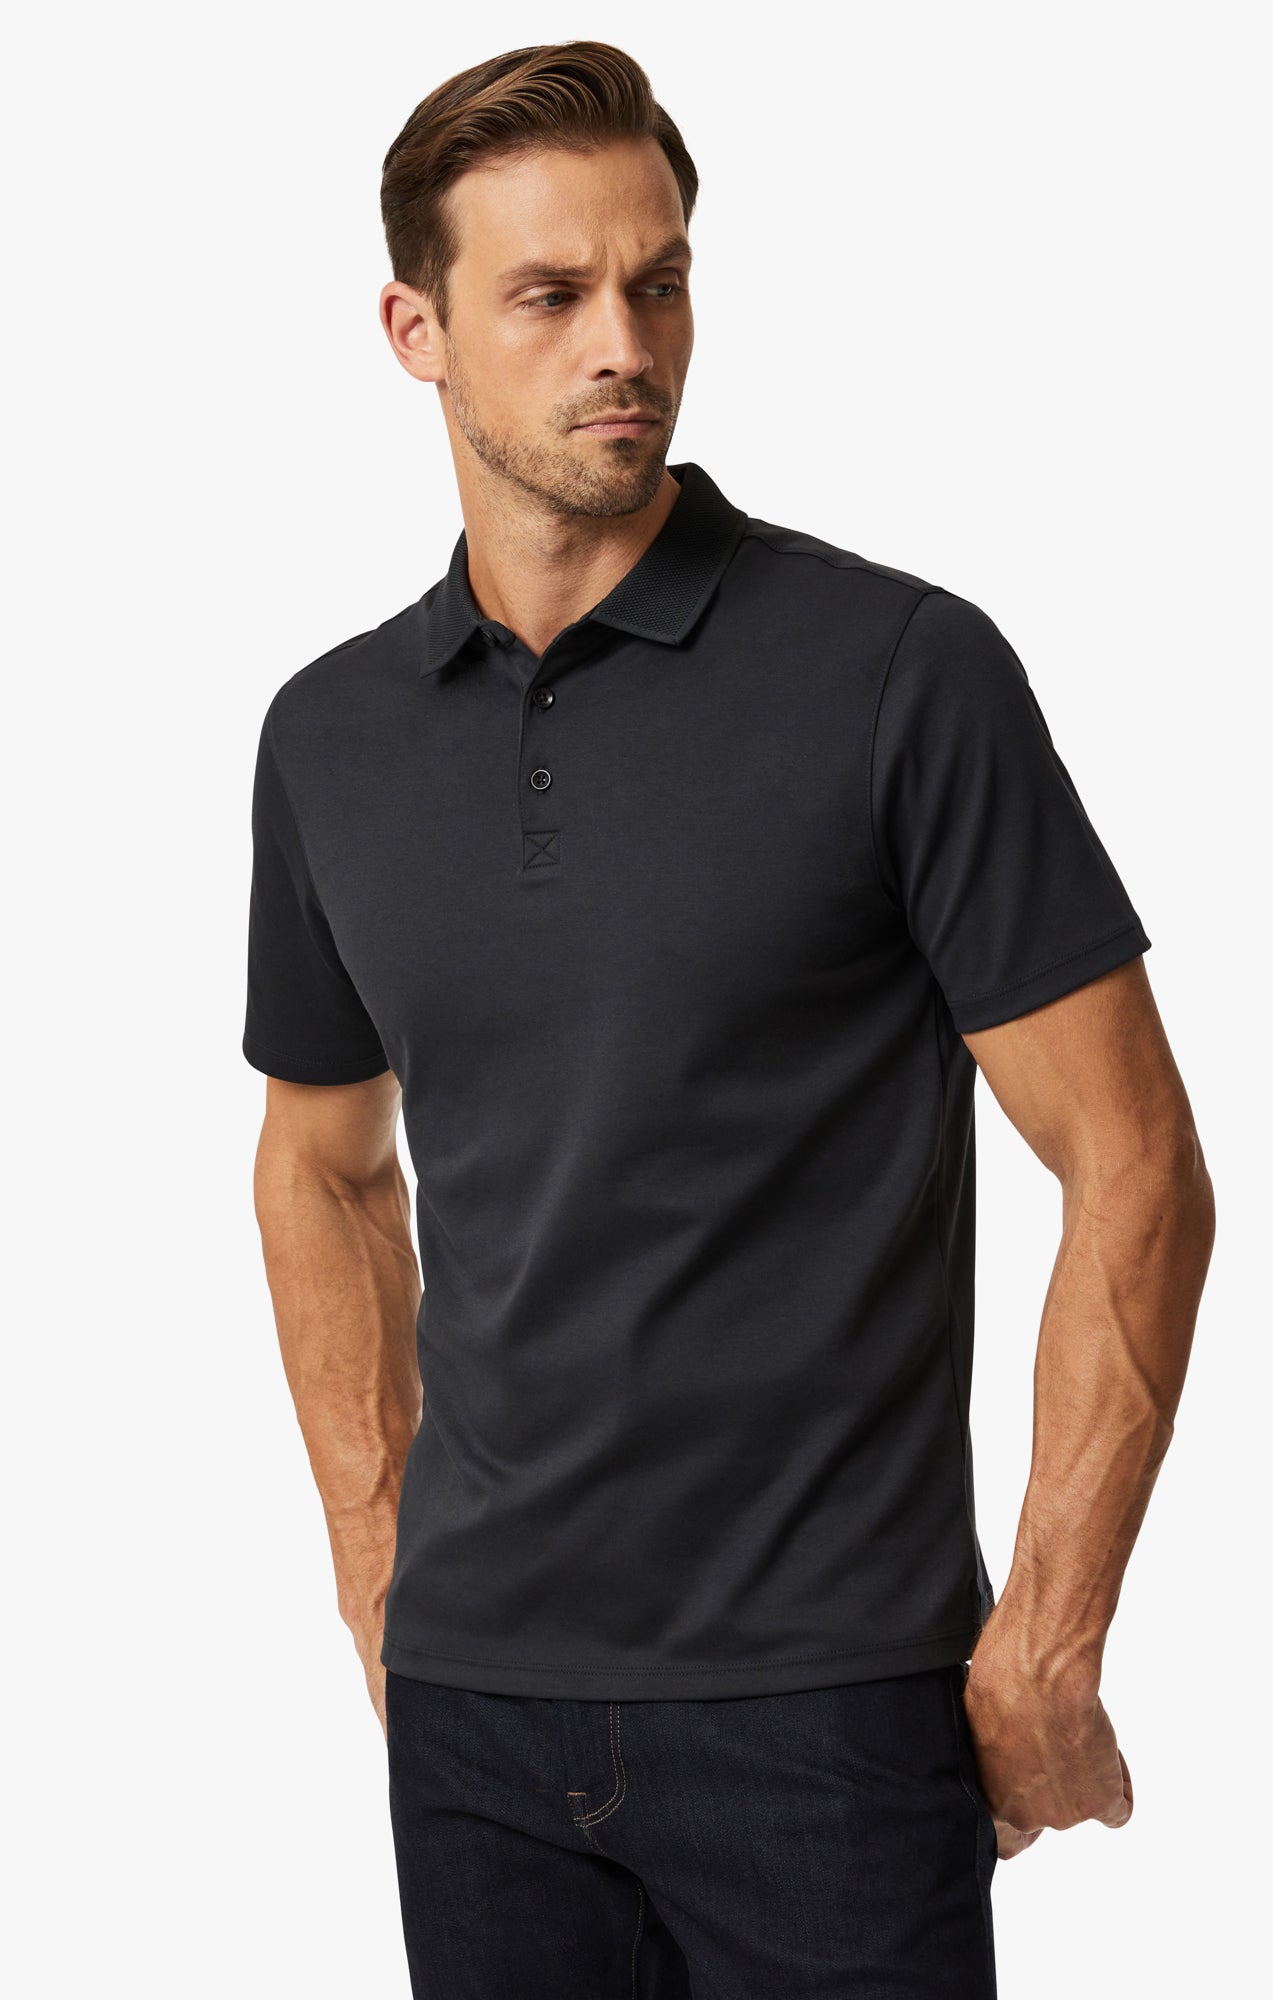 Polo T-Shirt In Black Image 2